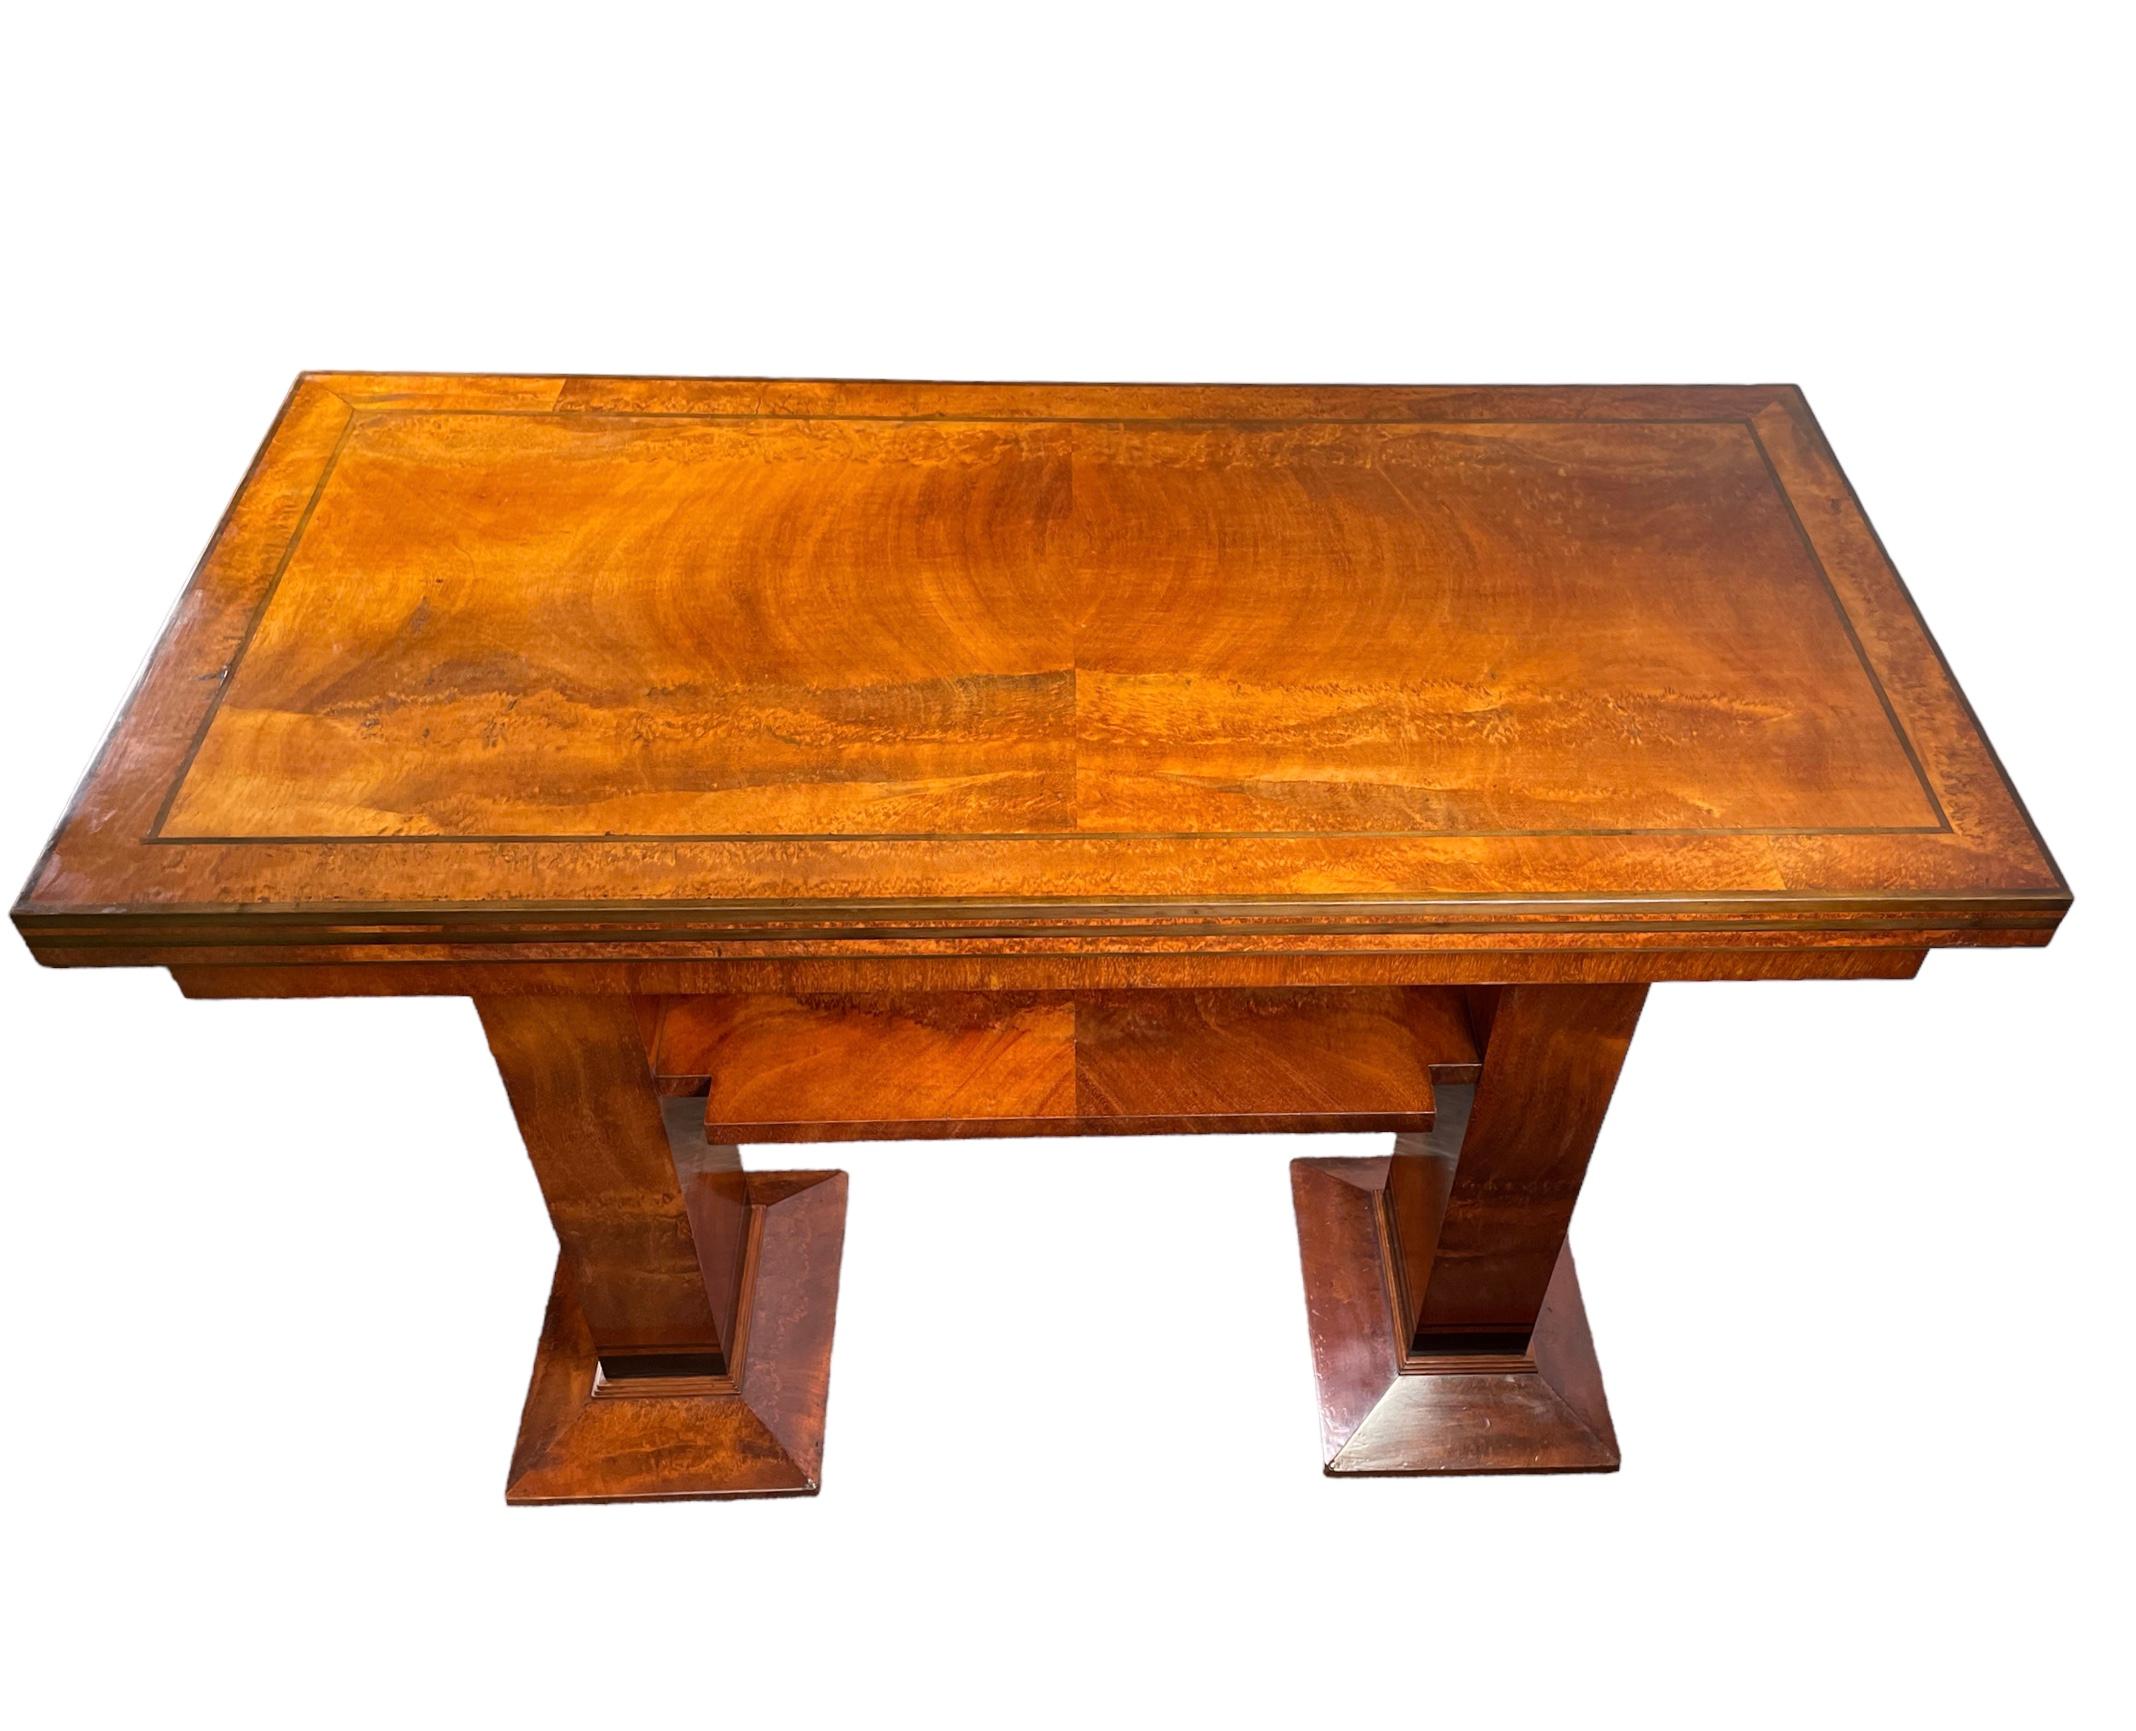 Mahogany Art Deco Console Serving Table by Charles A. Richter for Bath Cabinet Makers For Sale